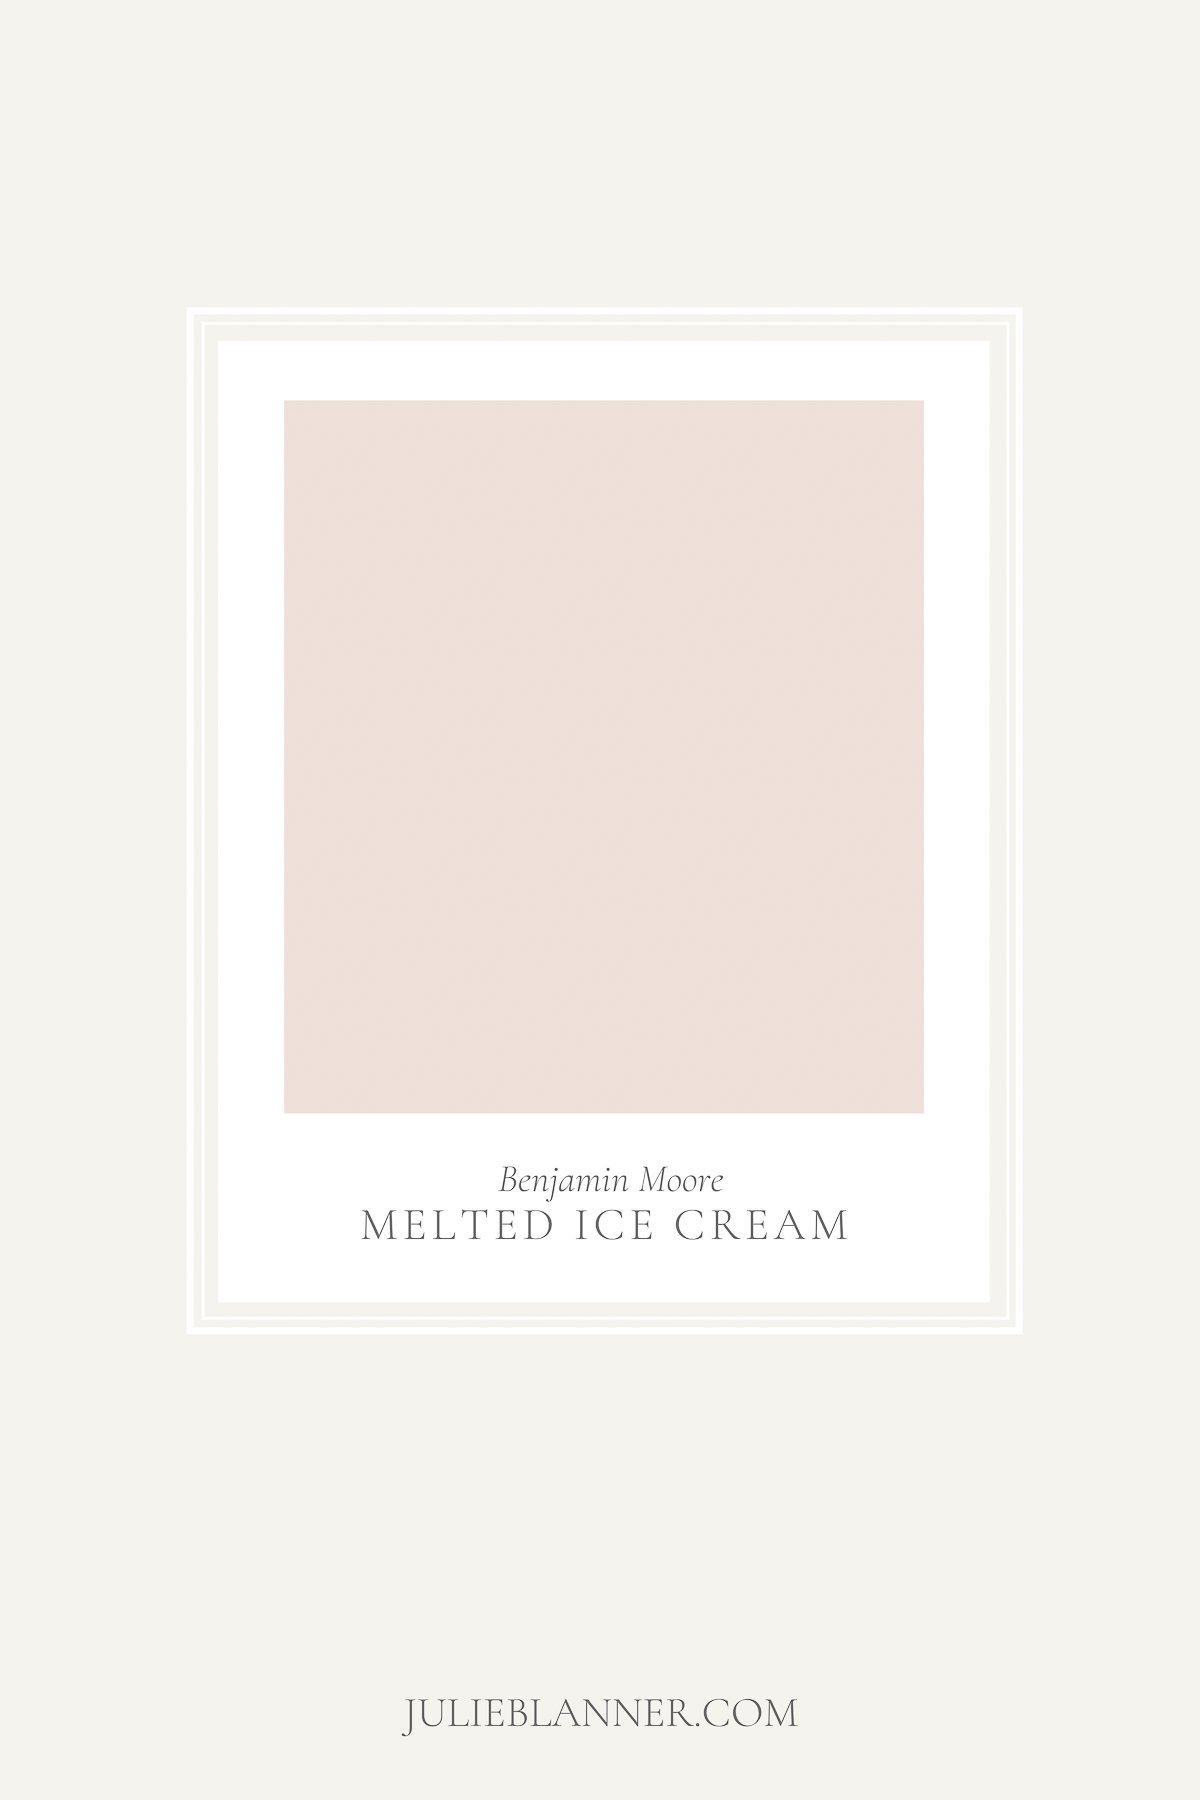 A paint sample card of Benjamin Moore Melted Ice Cream, as part of a blush pink paint guide.